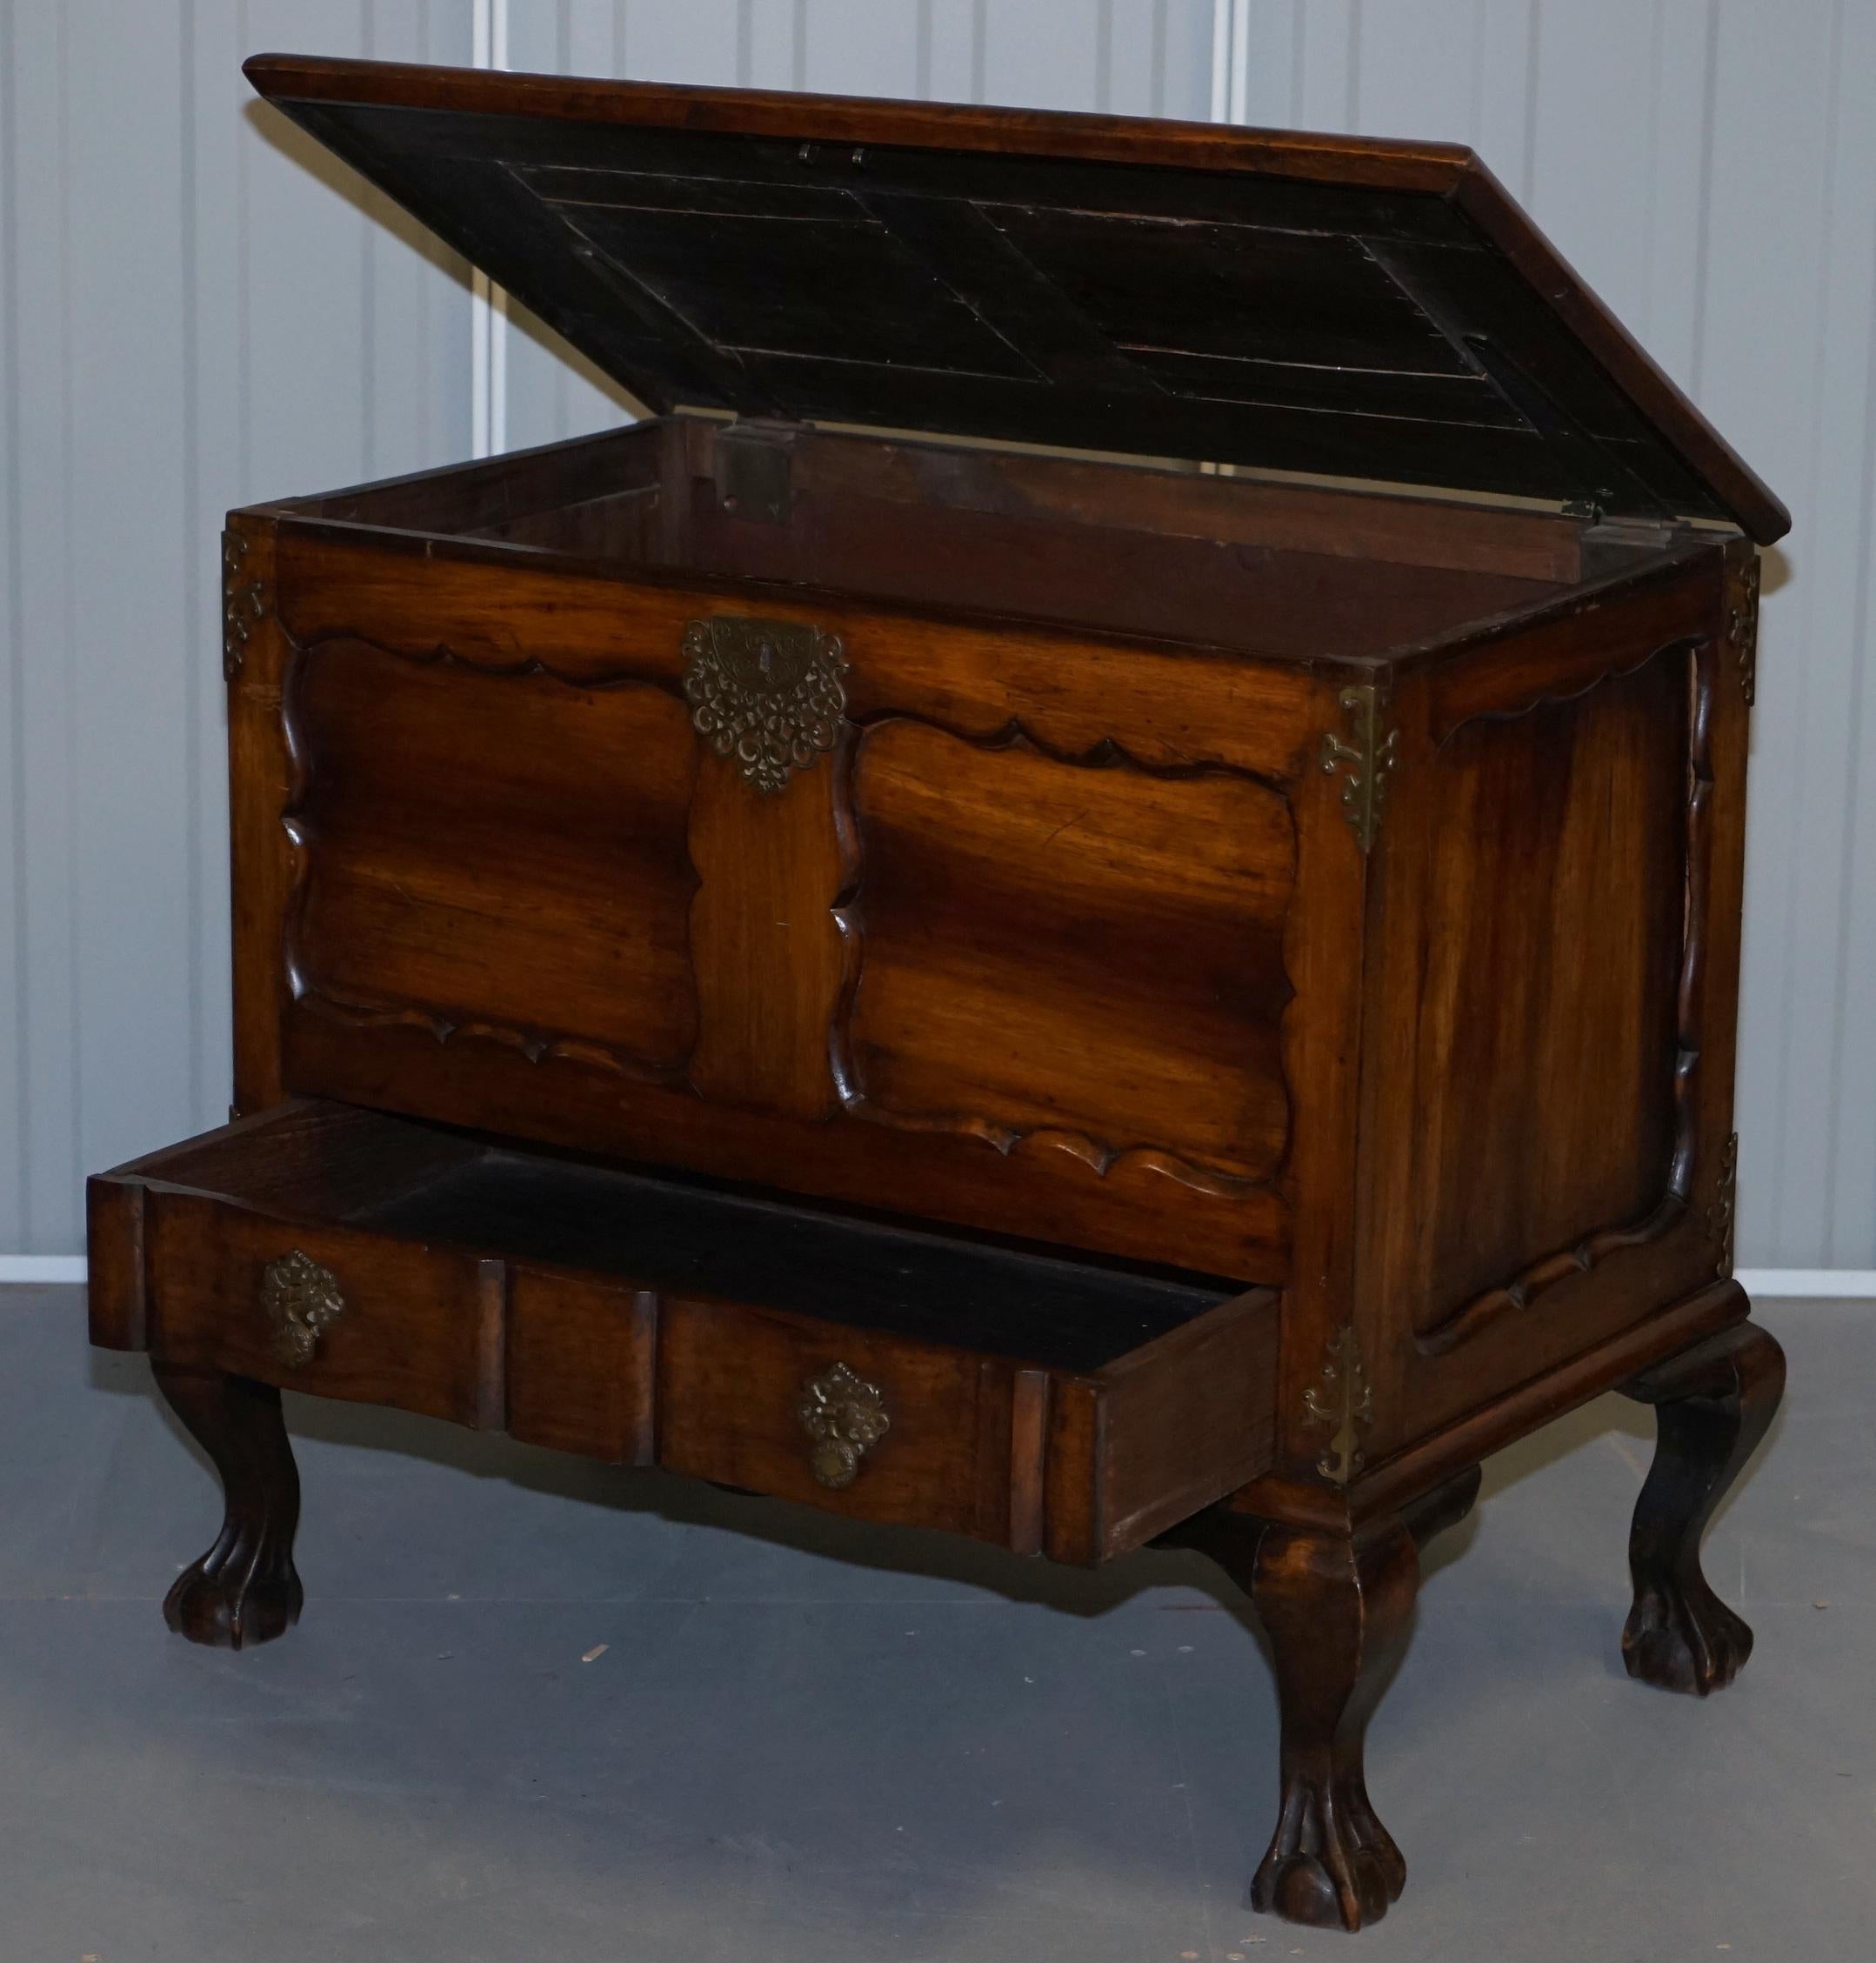 Fait main Lovely Vintage Hardwood Ornately Carved Trunk Chest with Drawer Claw & Ball Legs en vente